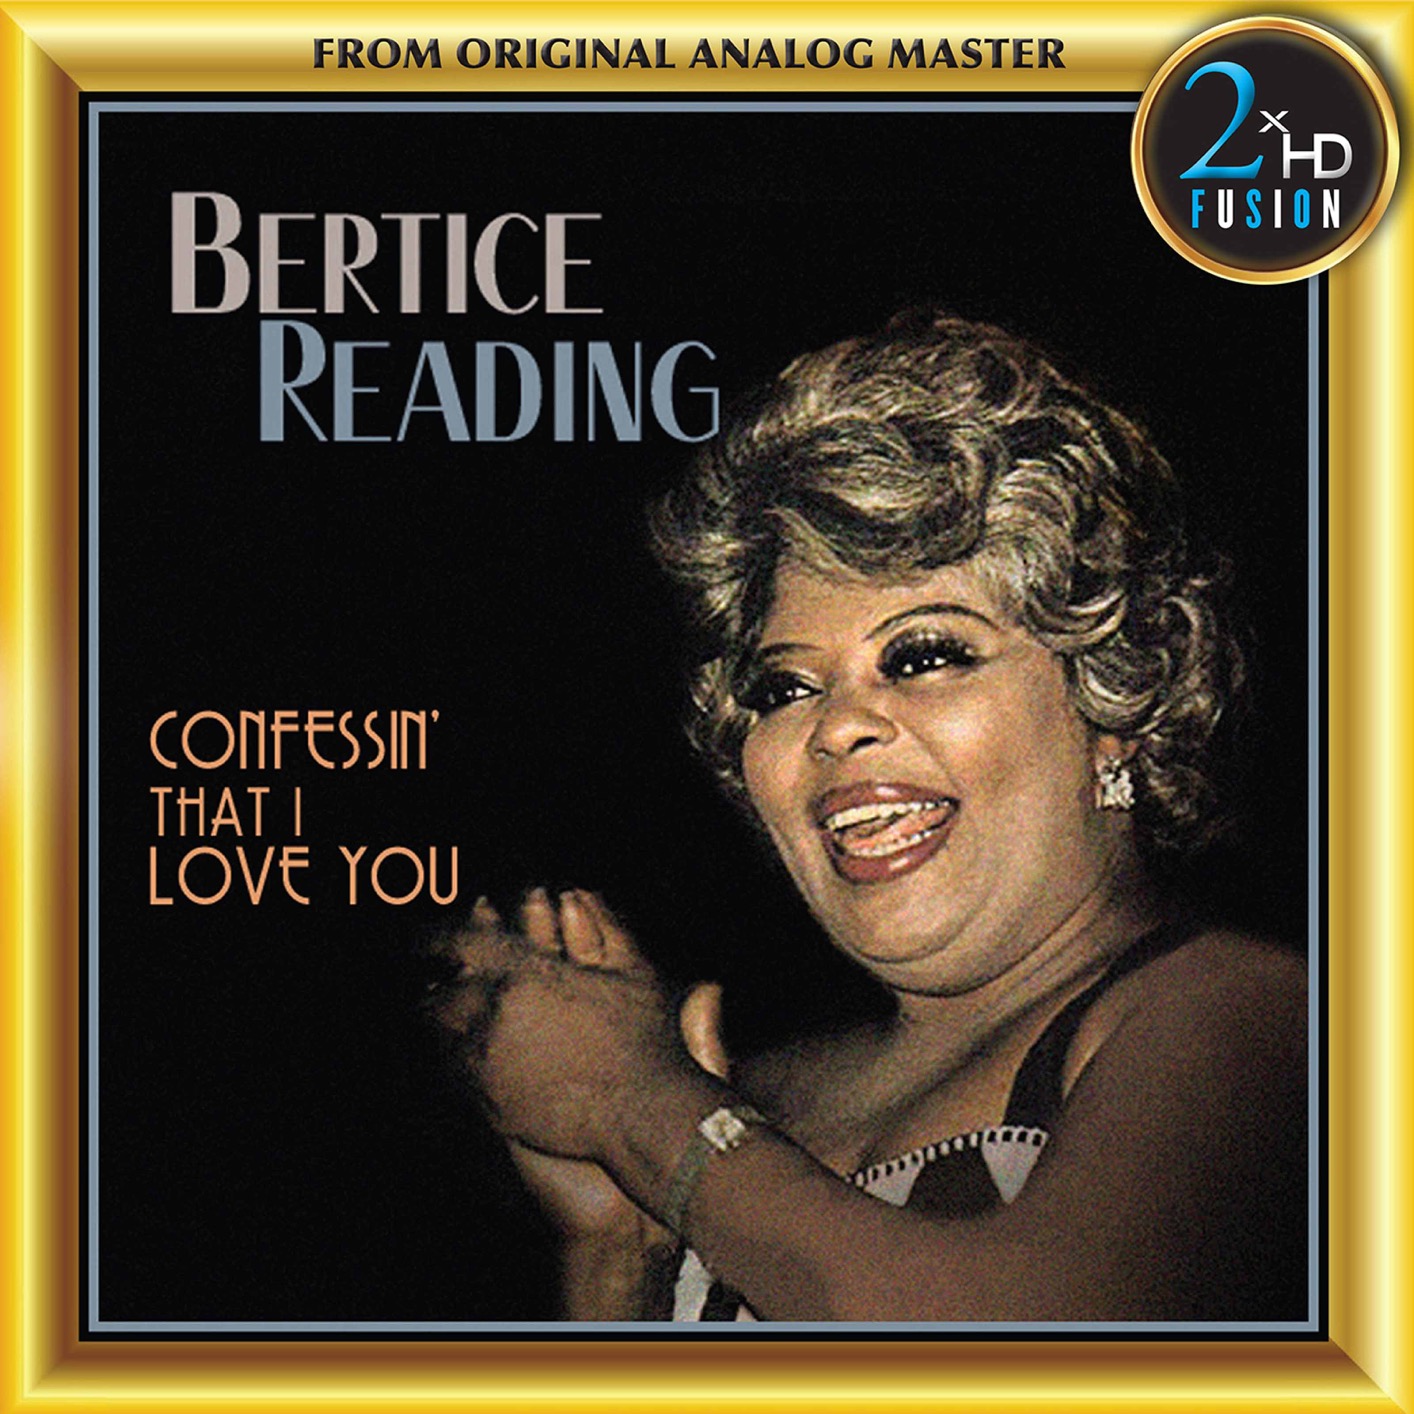 Bertice Reading – Confessin’ That I Love You (Remastered) (2020) [FLAC 24bit/192kHz]